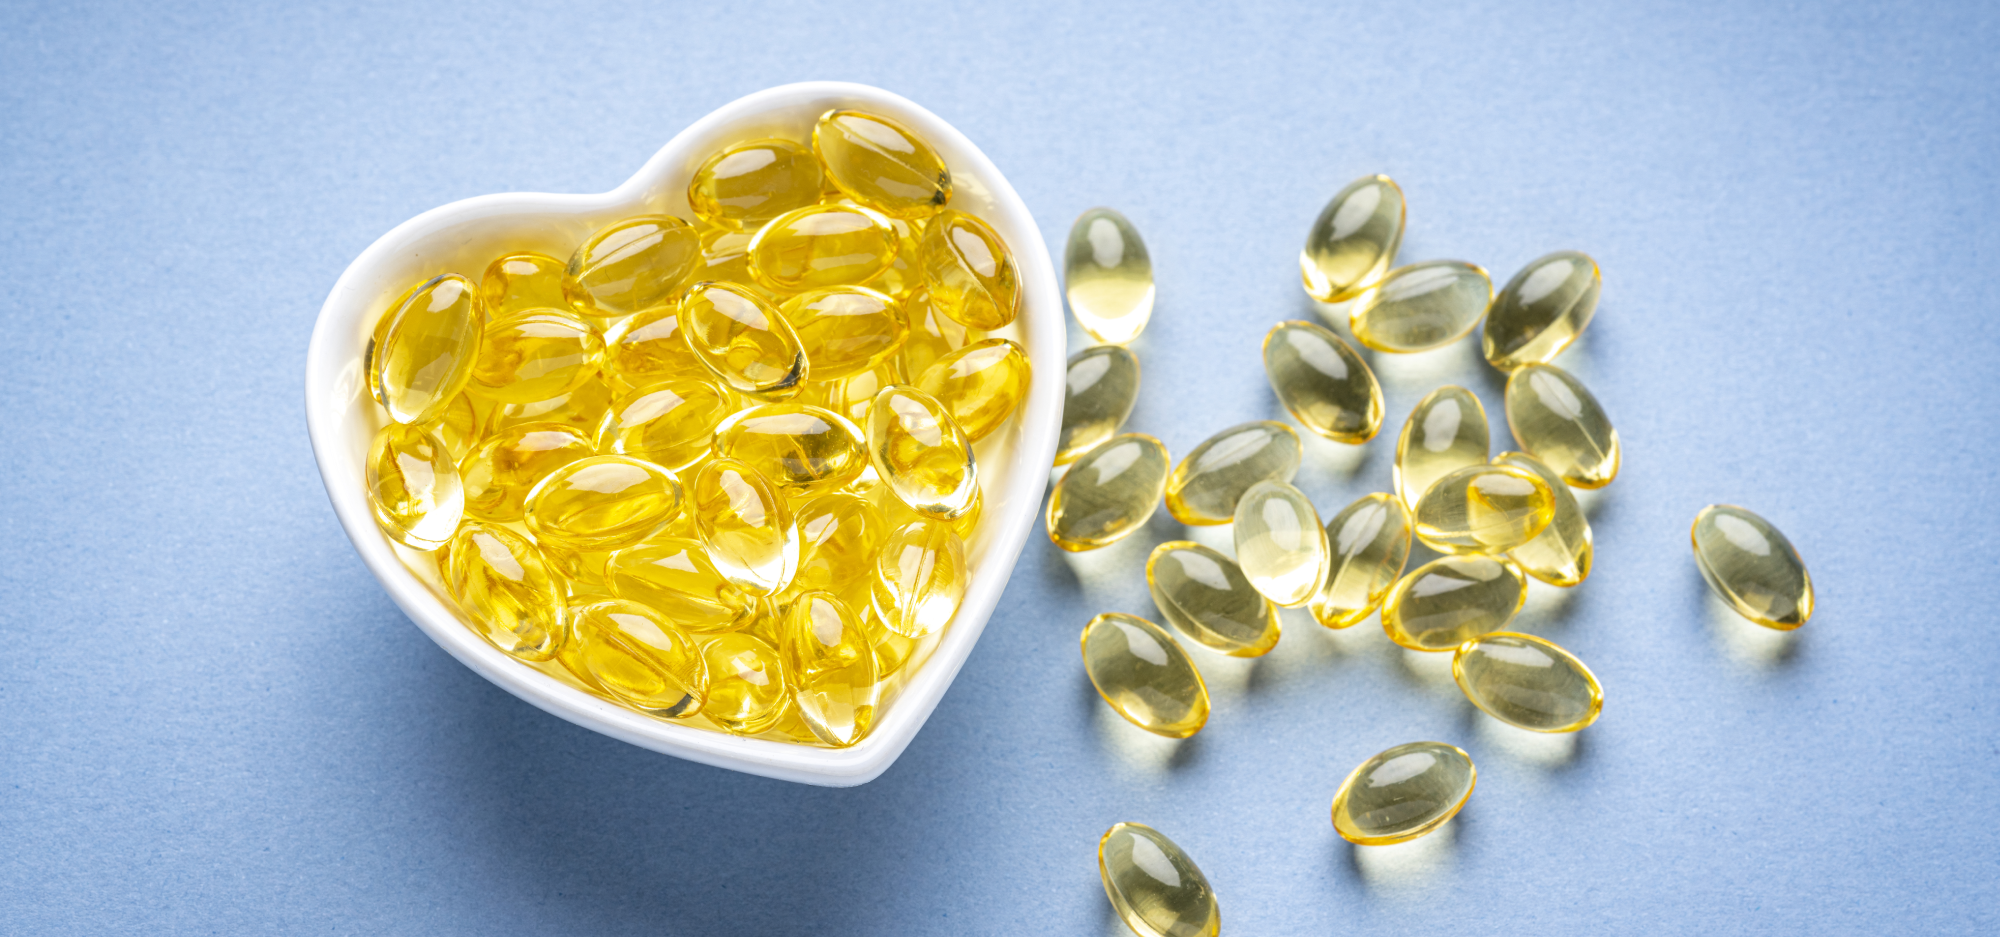 Exploring Heart Health & Omega-3 Supplements Beyond Fish Oil